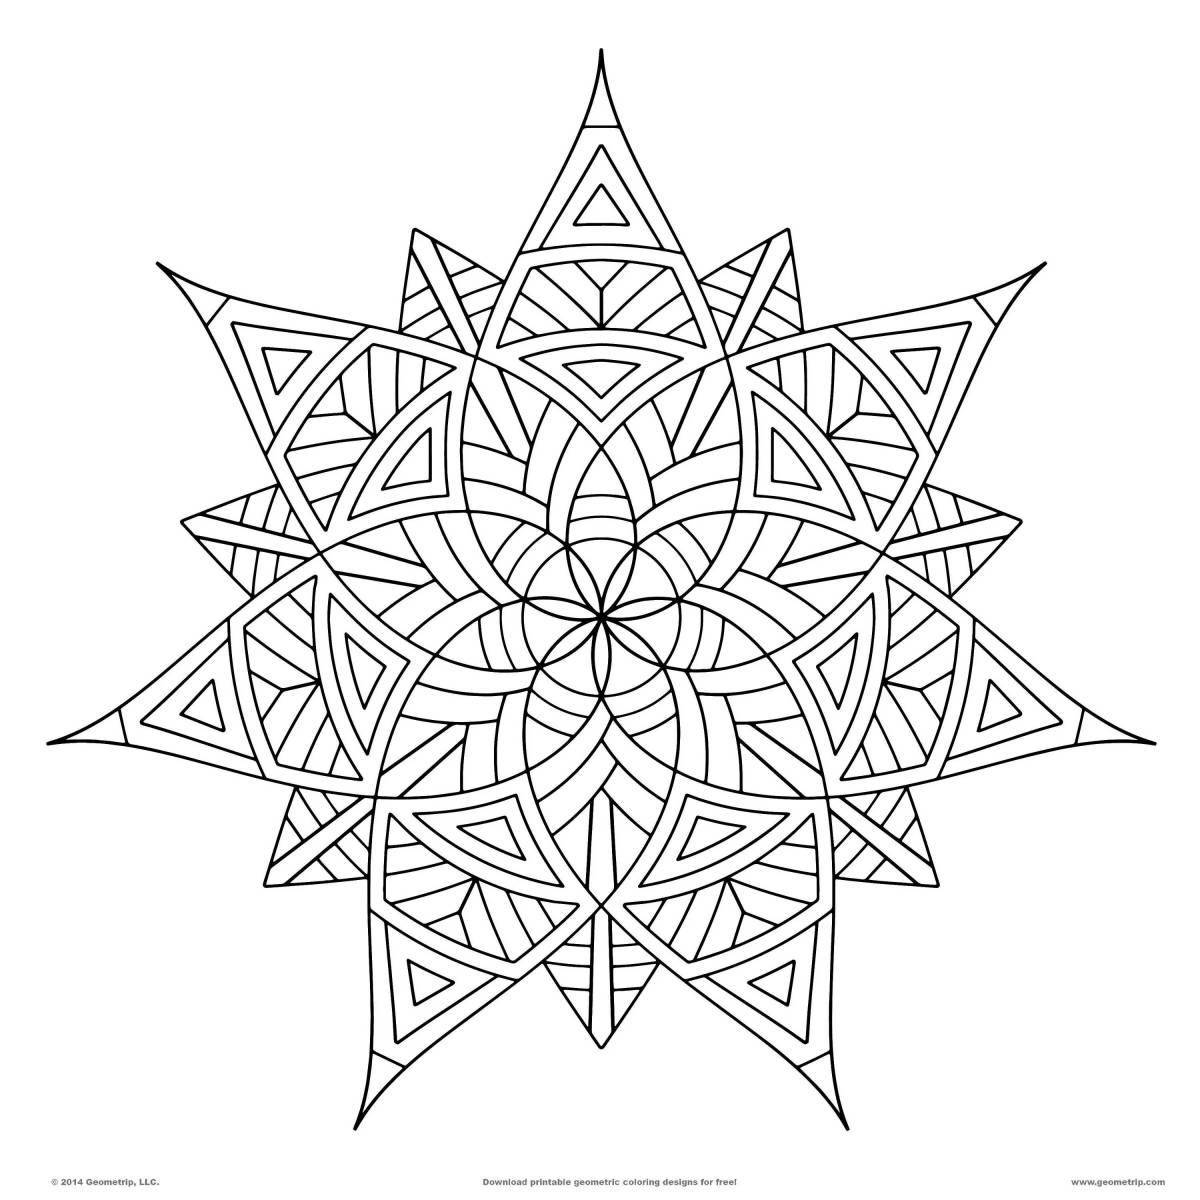 Coloring page with bright geometric pattern